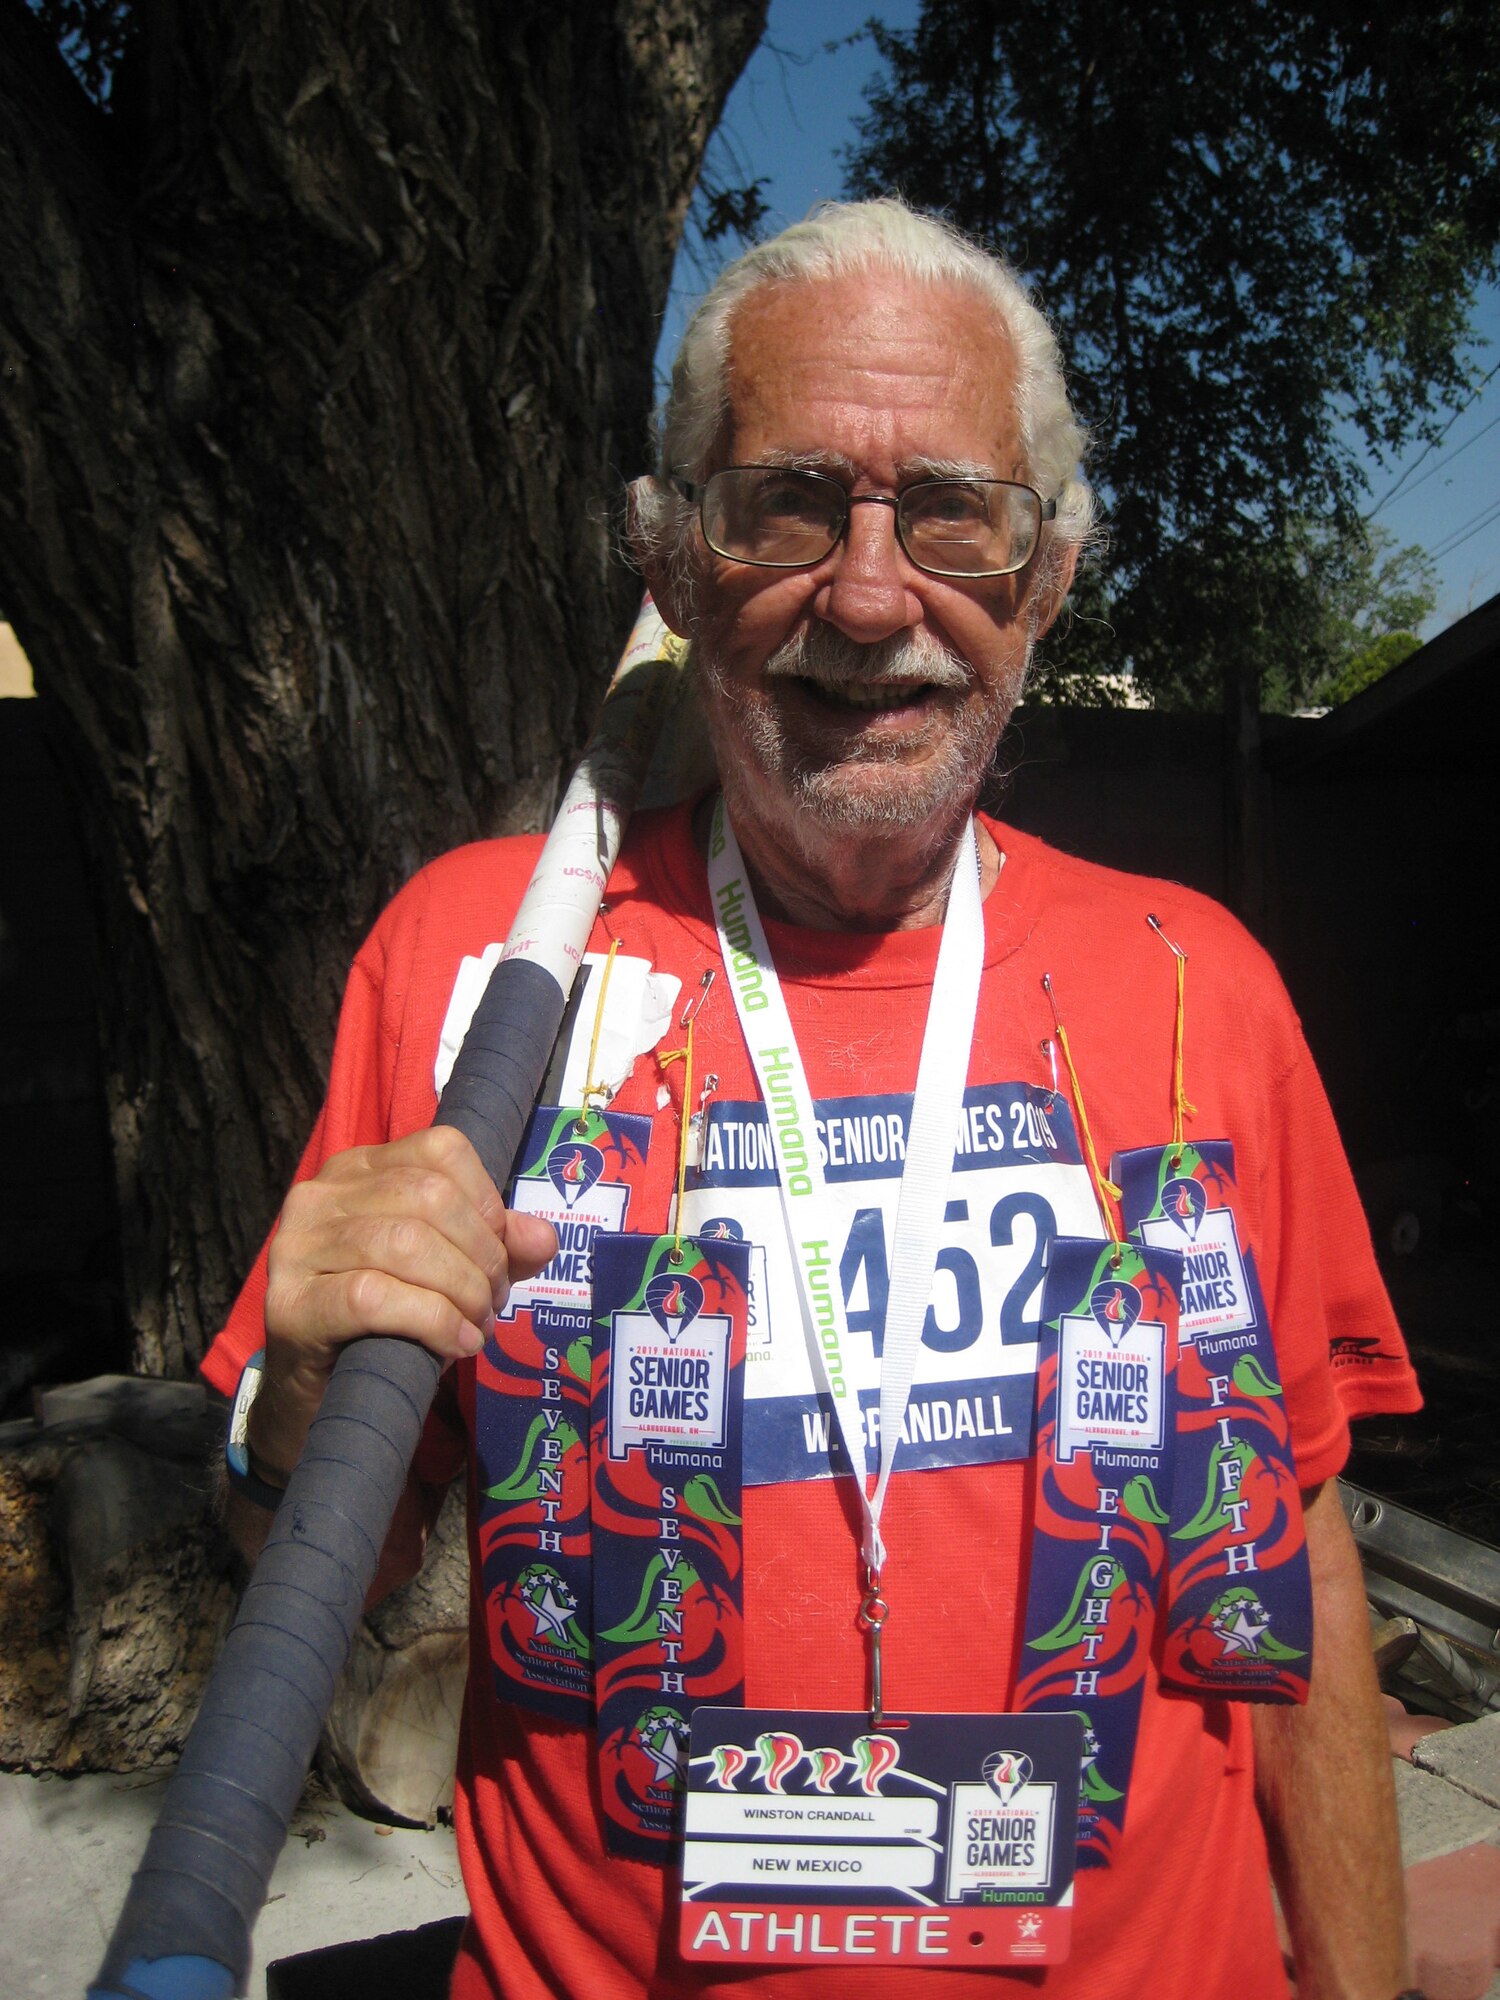 Retired Lt. Col. and former Team Kirtland member Winston Crandall displays his decorations for top-10 finishes at the National Senior Games June 22. The games, taking place in the Duke City from June 14 to 25, feature competition for people over 50 in 20 different sports. Many veterans and Albuquerque residents are taking part in the games, which have featured more than 13,700 athletes participating. Crandall, who served at Phillps Lab (now Air Force Research Laboratory New Mexico) toward the end of his Air Force career—he retired in 1992—has been an Albuquerque resident ever since. He competed and placed in the top 10 in the 75-79 age category in the Pole Vault, Men’s 5,000- and 1,500-meter Race Walk, and Powerwalk. (Courtesy photo)